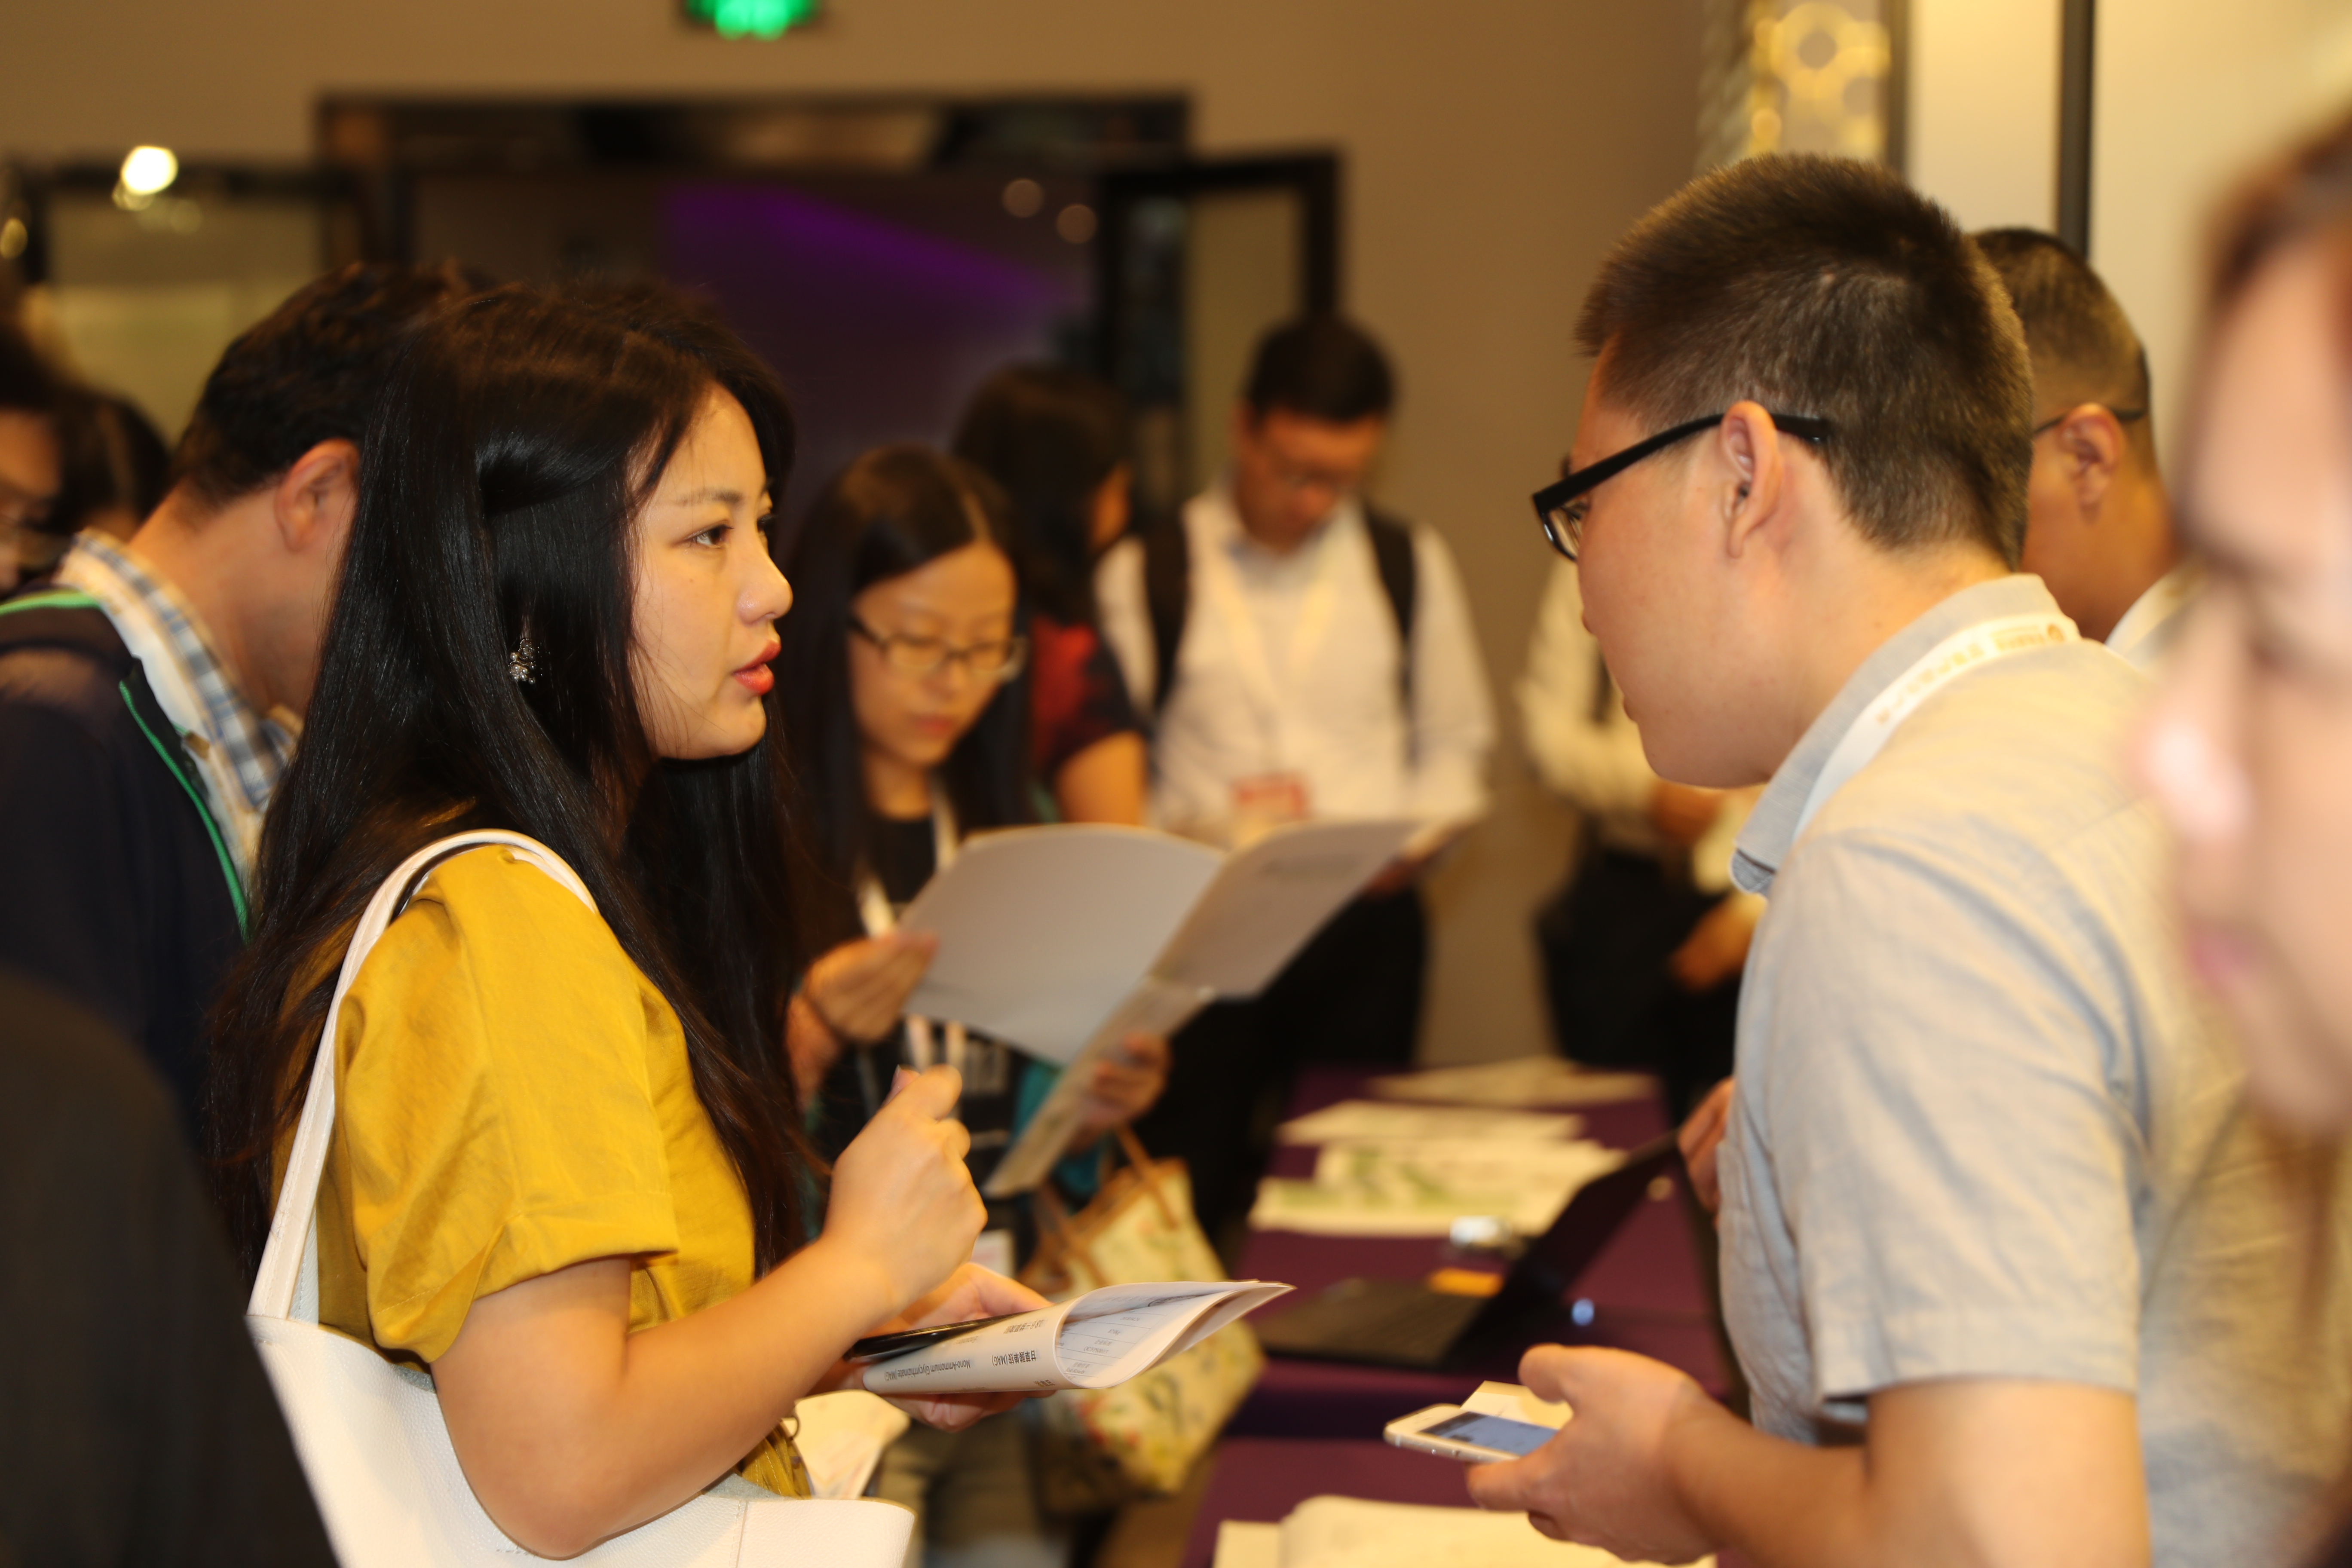 PCHi 2019: Trendspotting Amongst Attendees’ Top Objectives